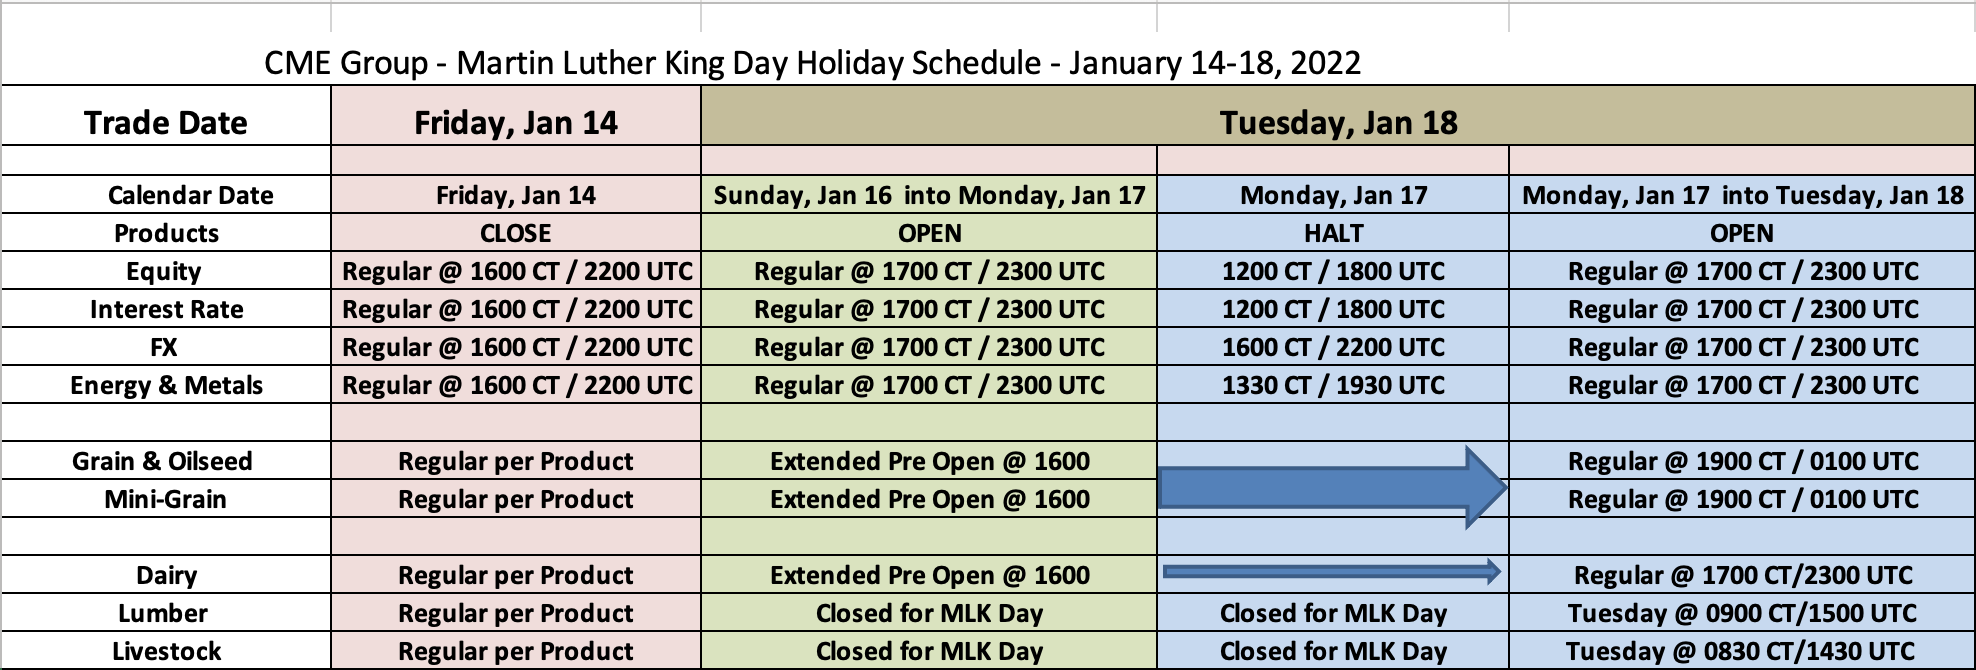 Martin Luther King Day Holiday Schedule - 2022